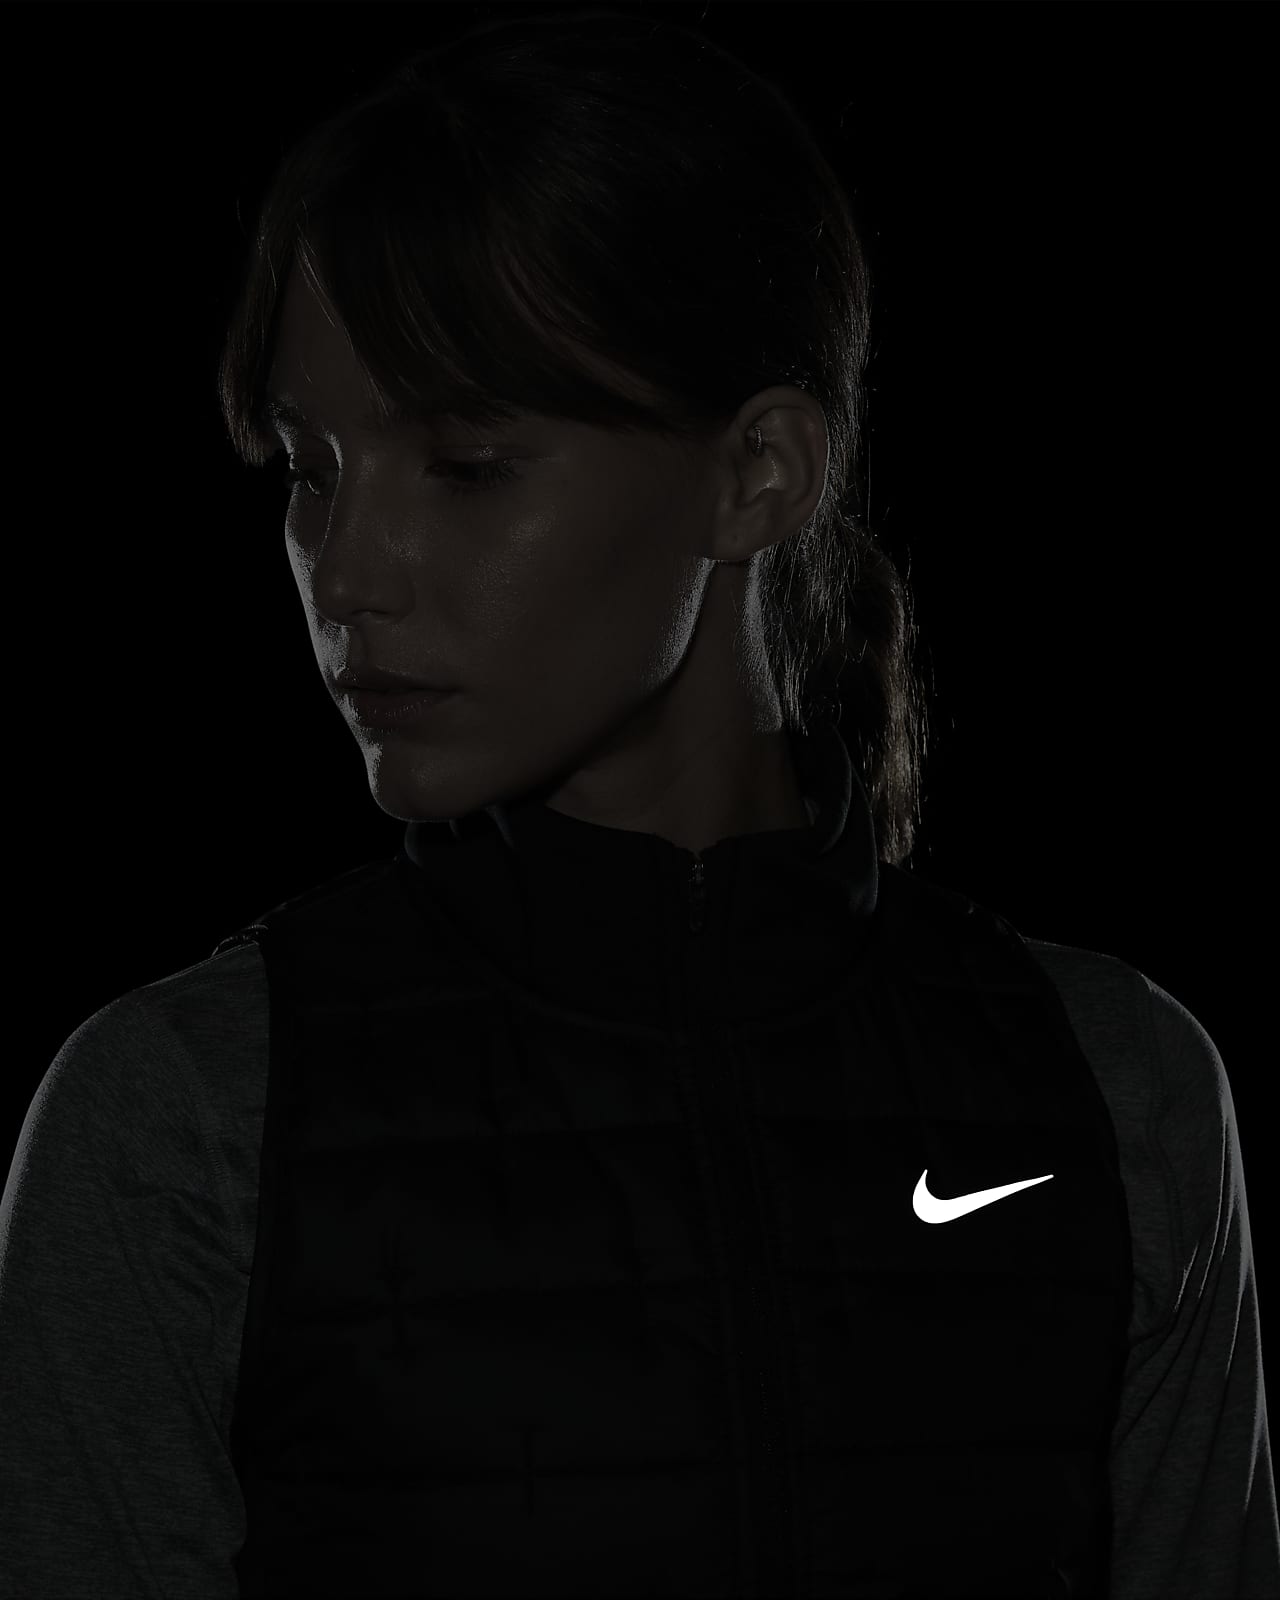 Women's, Nike Therma-FIT Synthetic Fill Running Vest